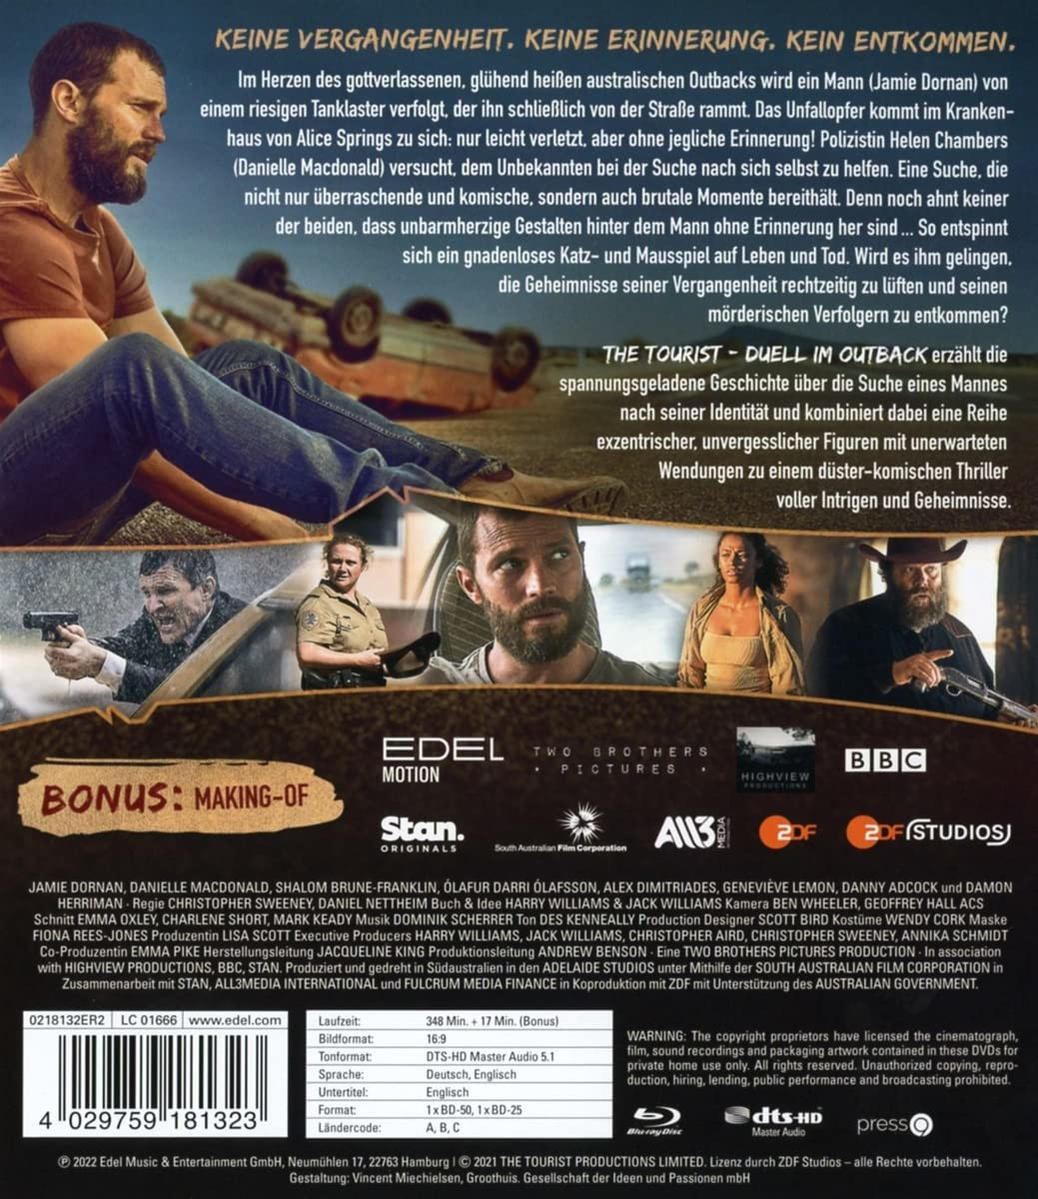 1 Outback-Staffel Tourist-Duell Im Blu-ray The